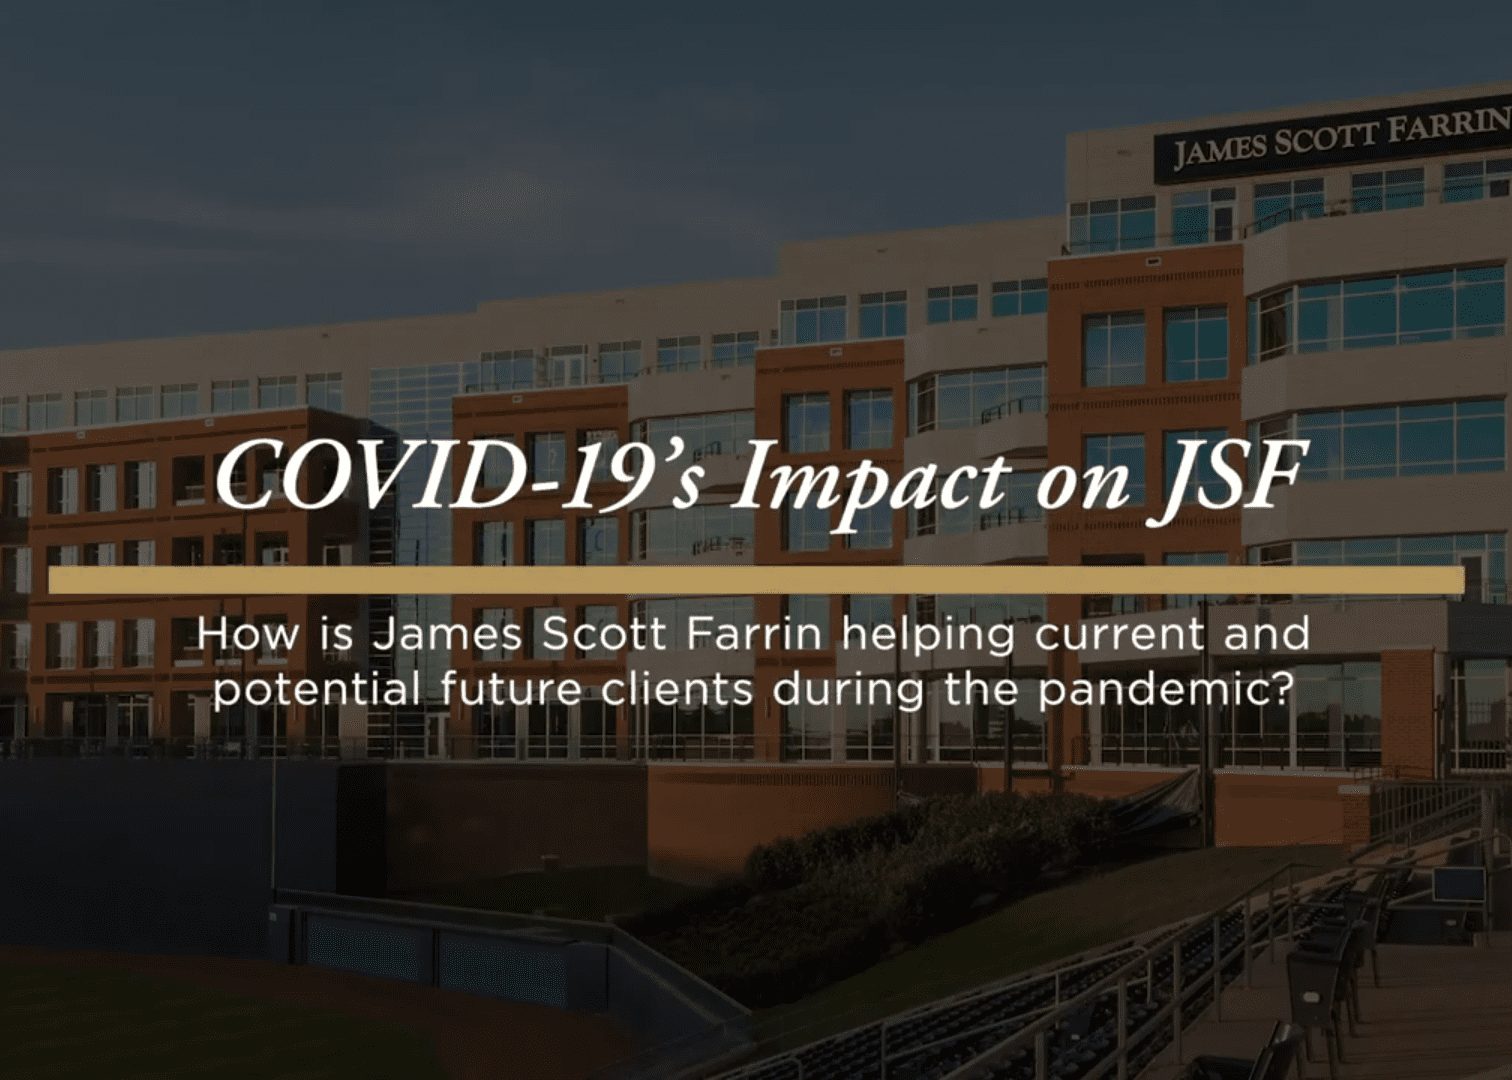 How is James Scott Farrin helping clients during the COVID-19 pandemic?